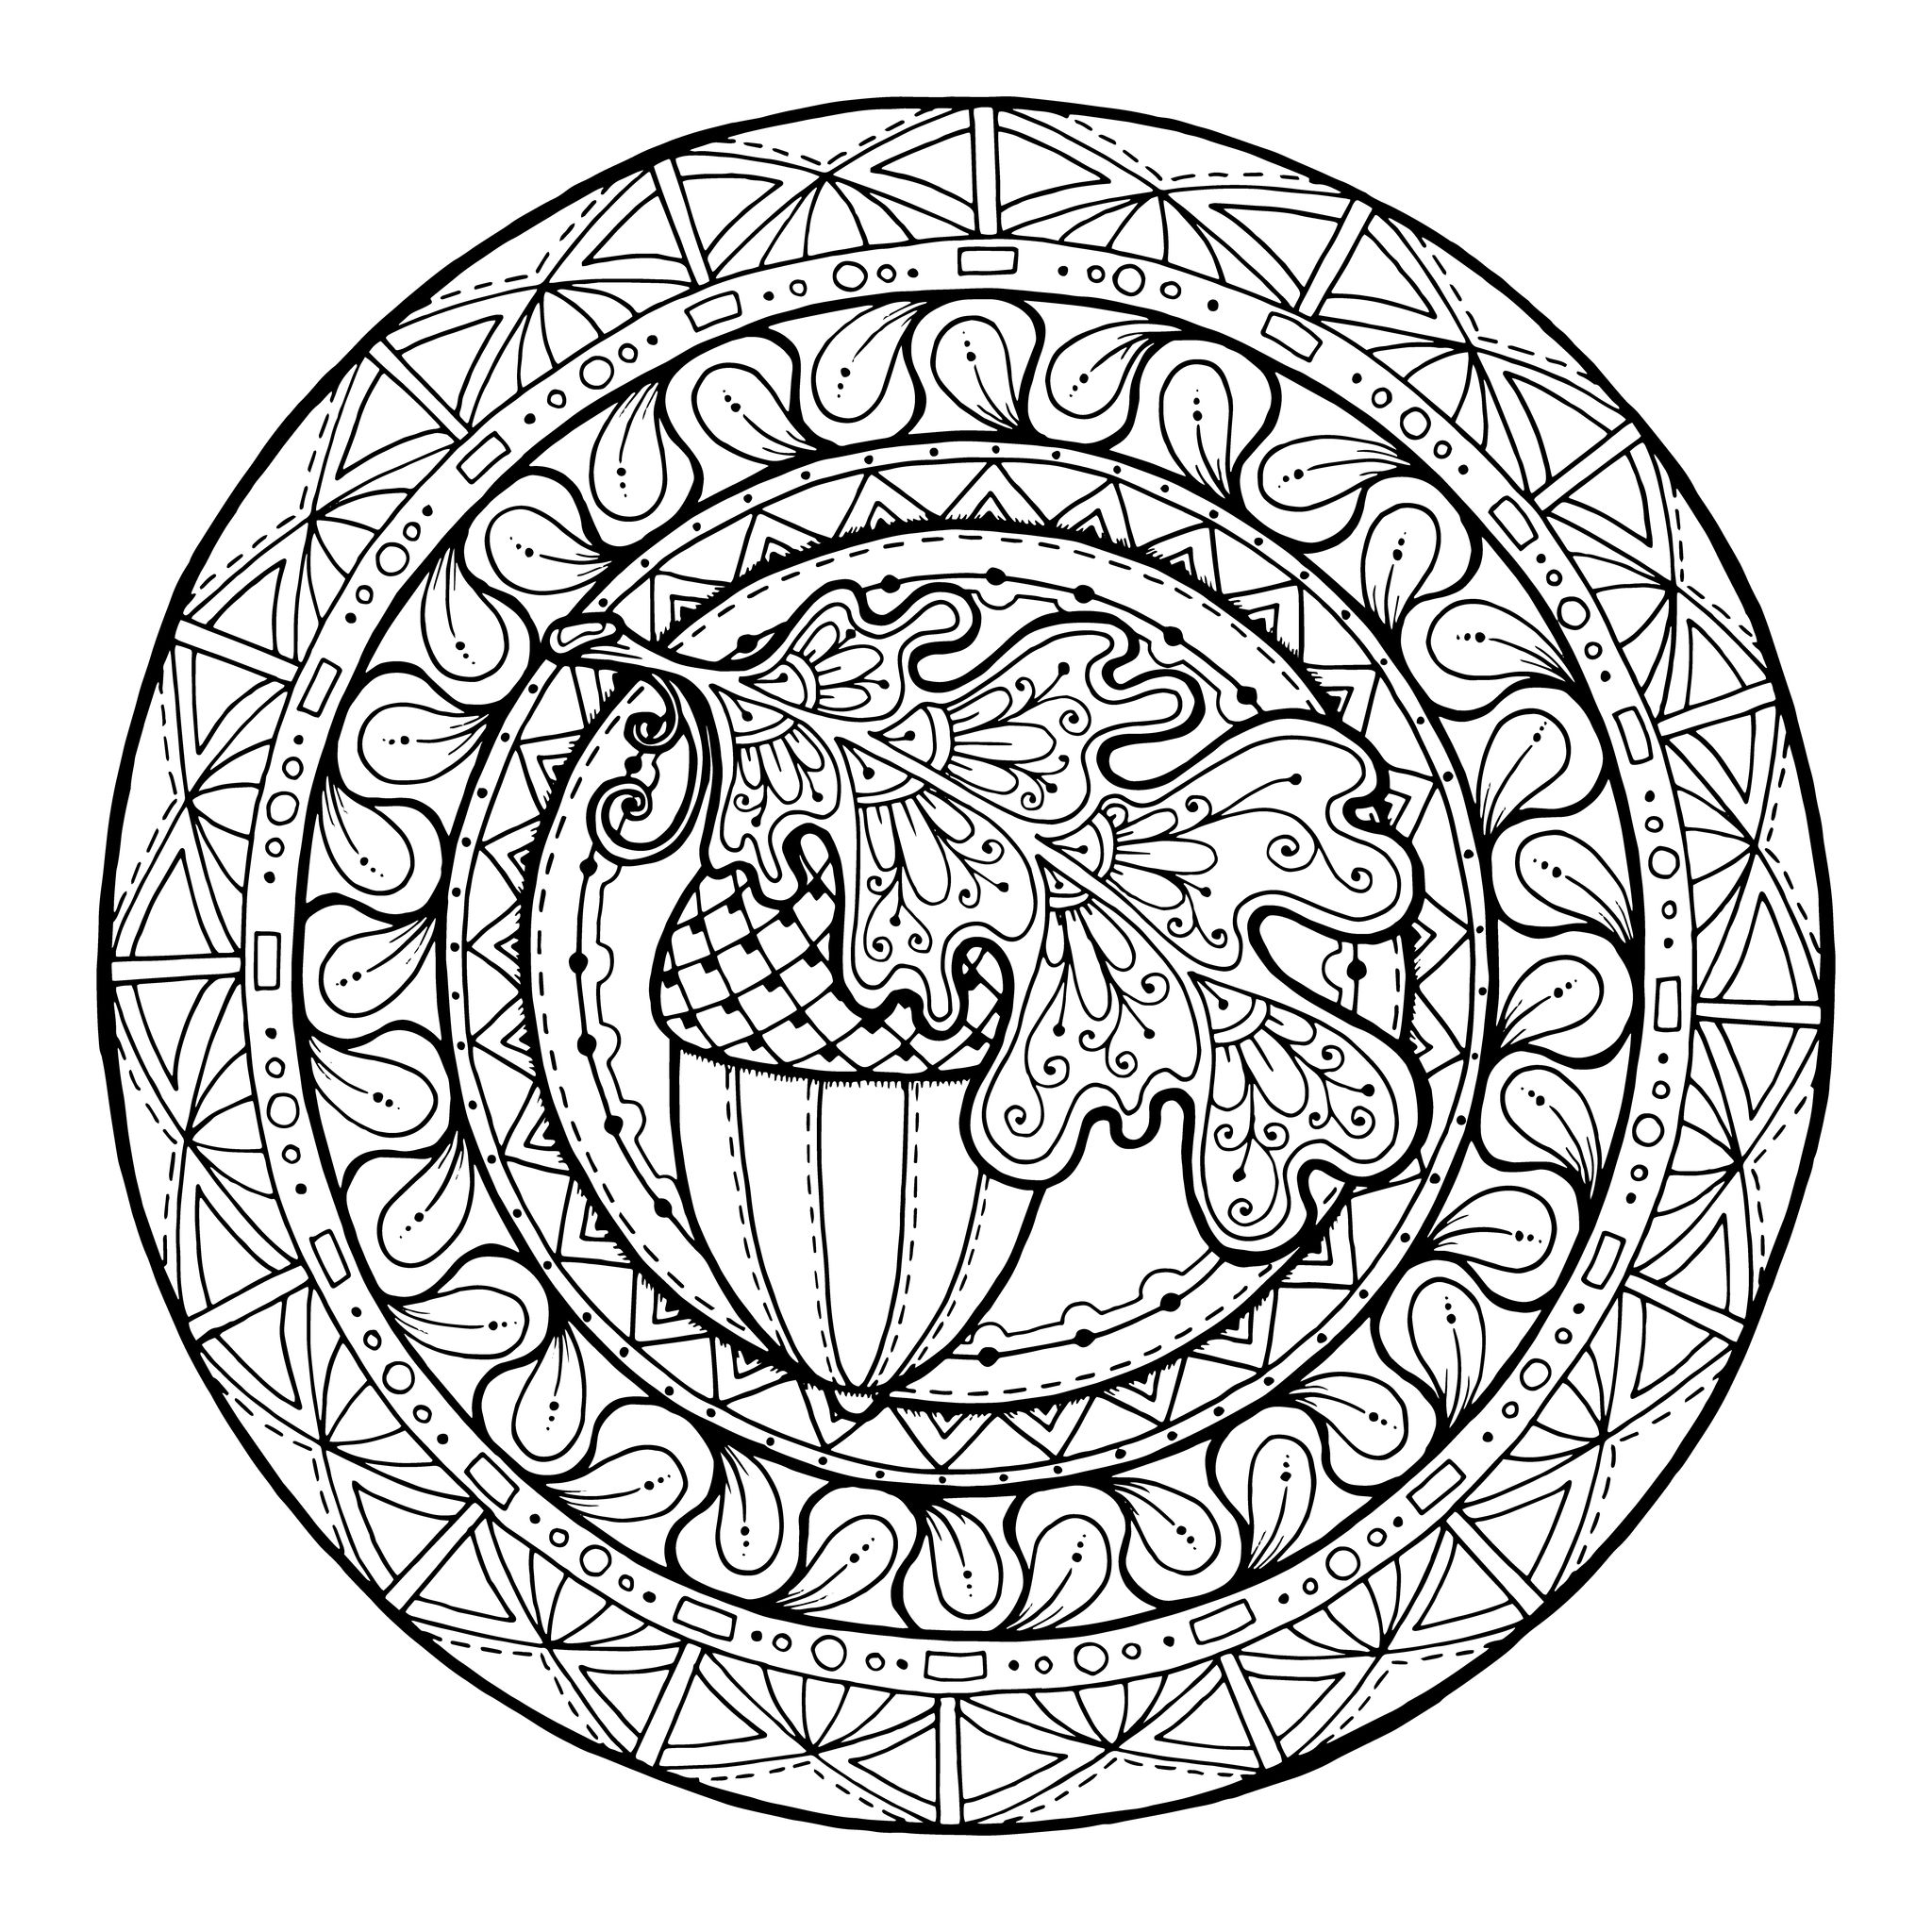 870 Coloring Pages Fall Mandala Images & Pictures In HD